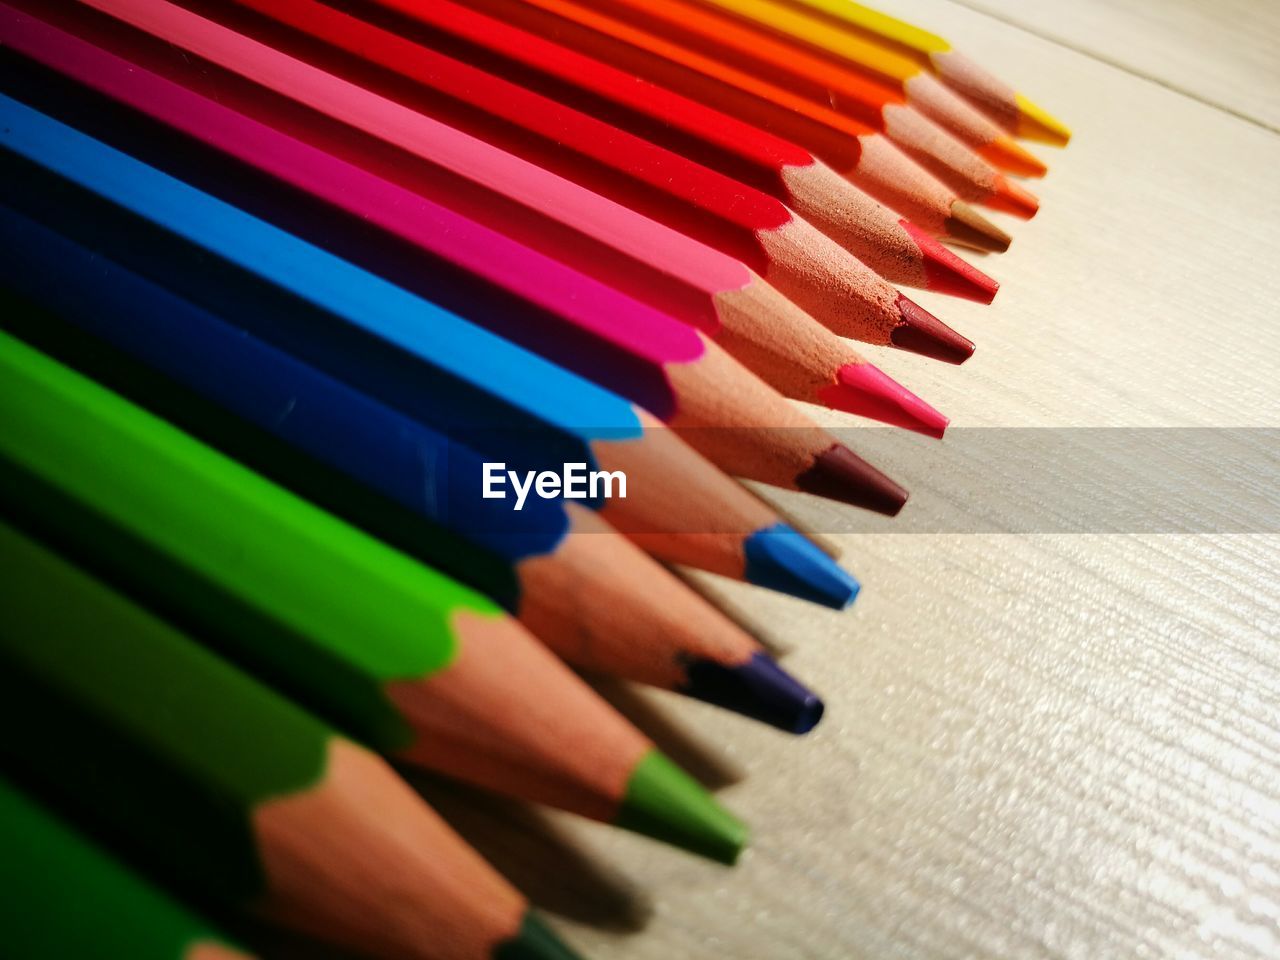 Close-up of colorful pencils arranged on table